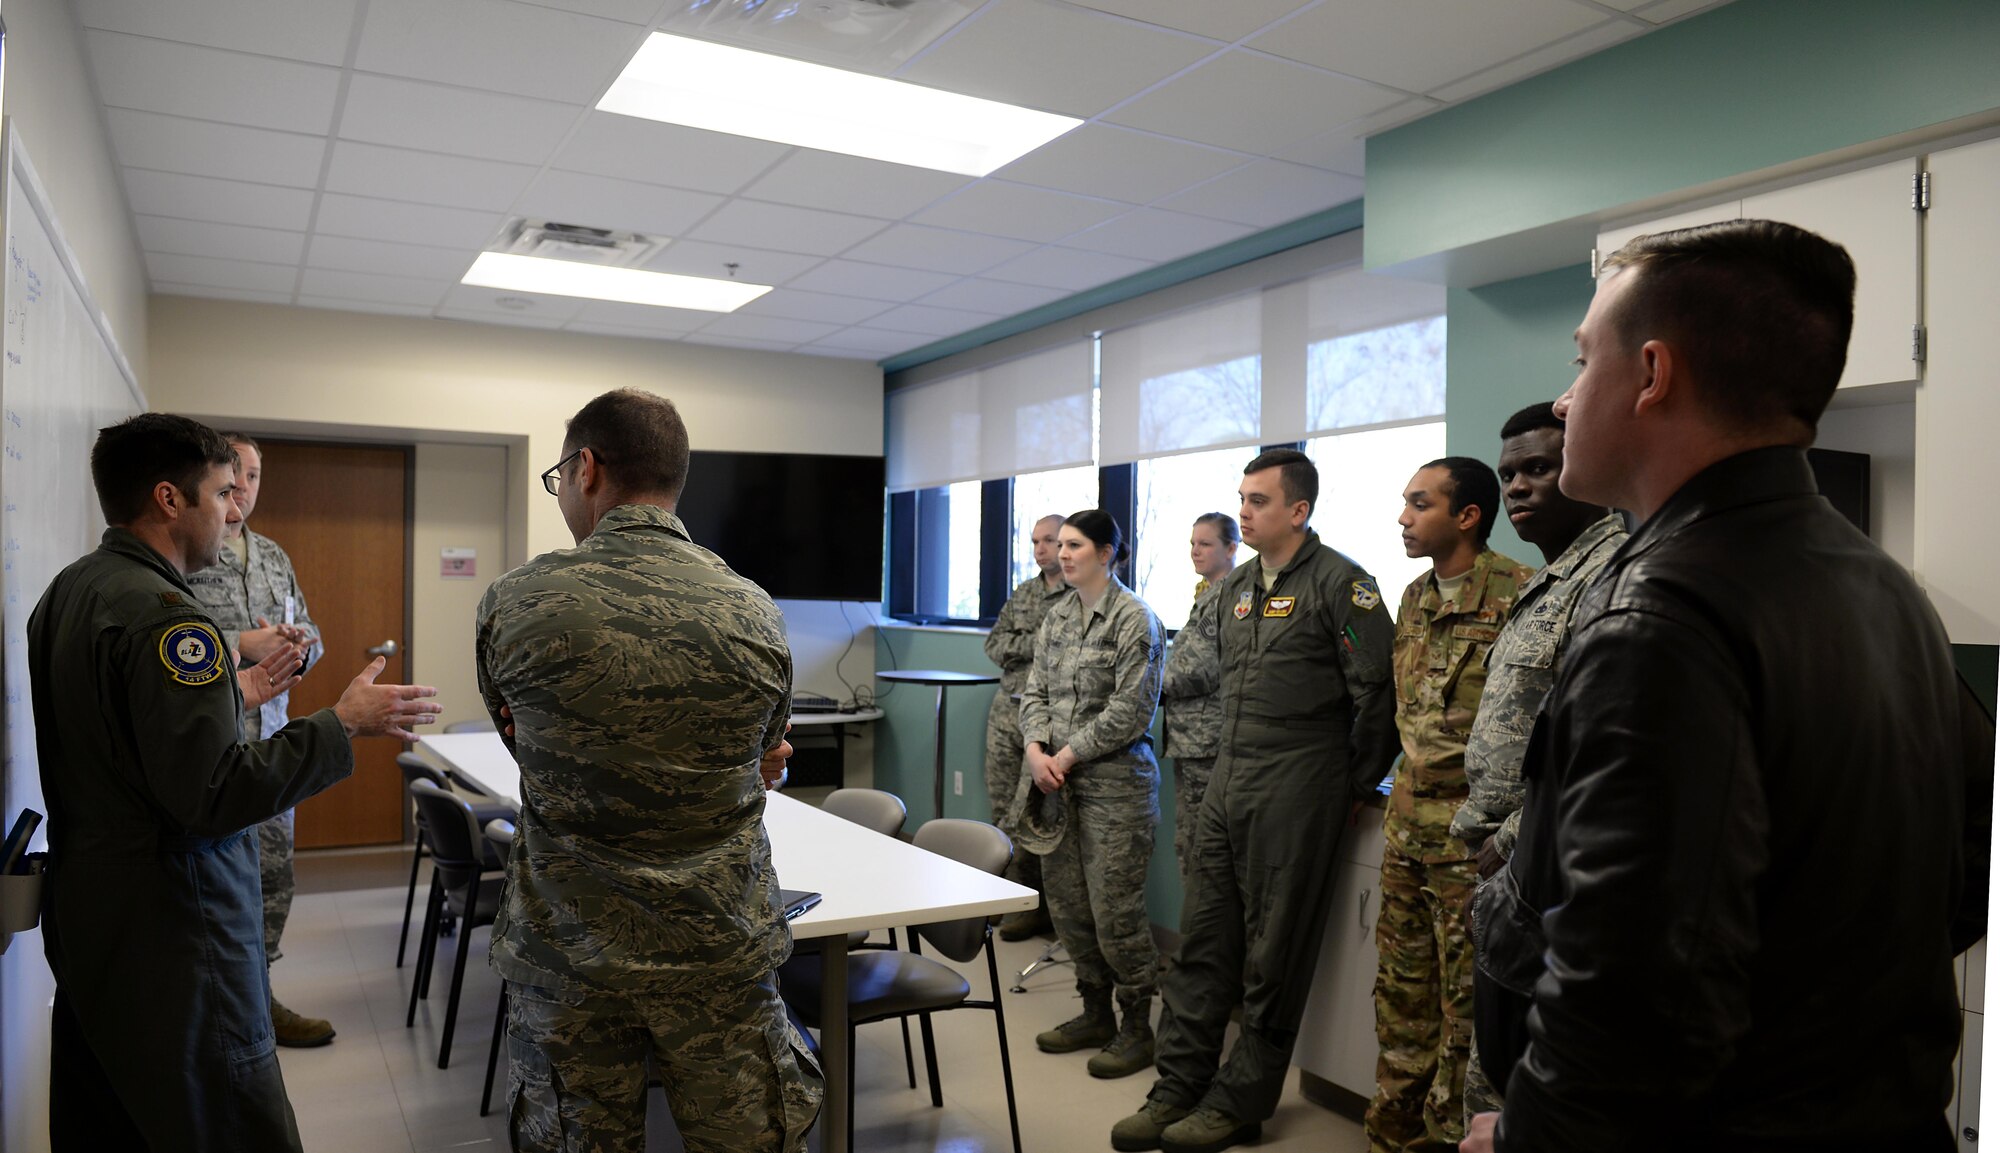 Airmen from the 552nd Air Control Wing at Tinker Air Force Base, Oklahoma, tour the Koritz Clinic with Capt. Scott Mckeithen, 14th Medical Group practice manager, and Maj. Ryan Brewer, 14th Flying Training Wing director of innovation, Feb. 13, 2018, on Columbus AFB, Mississippi. They visited areas in the 14th MDG to see how the Columbus AFB Spark Cell has aided in projects utilizing innovation for faster and better daily operations. (U.S. Air Force photo by Airman Hannah Bean)